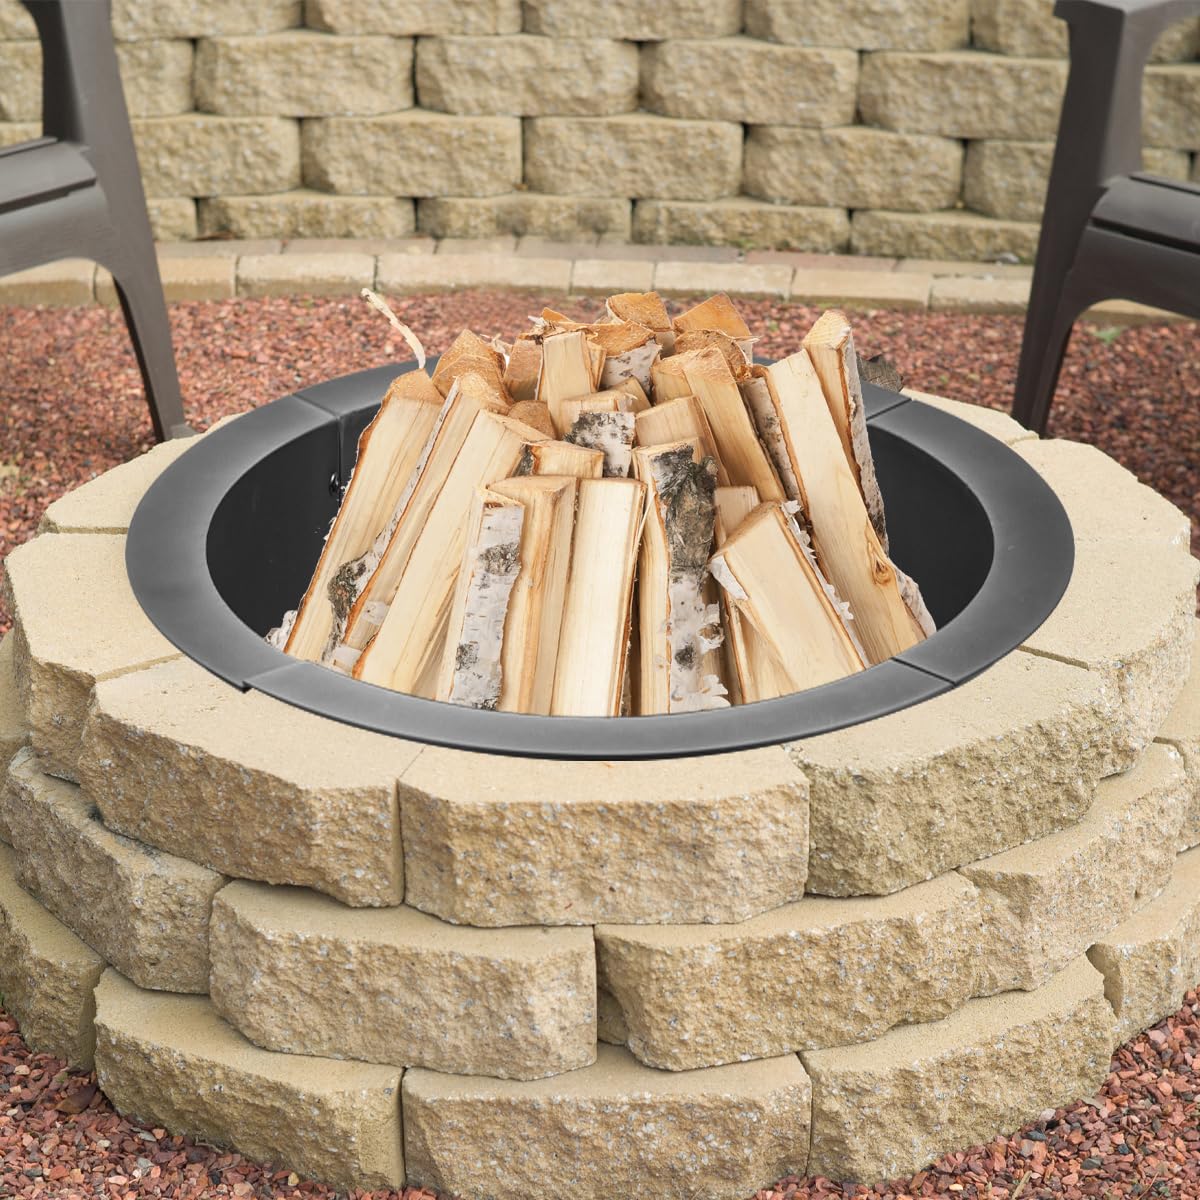 36 inch Fire Pit Ring for Outside,Heavy Duty Wood Burning Fire Pit Ring Insert, DIY Fire Pit Liner Campfire Ring Above or In-Ground for Outdoor